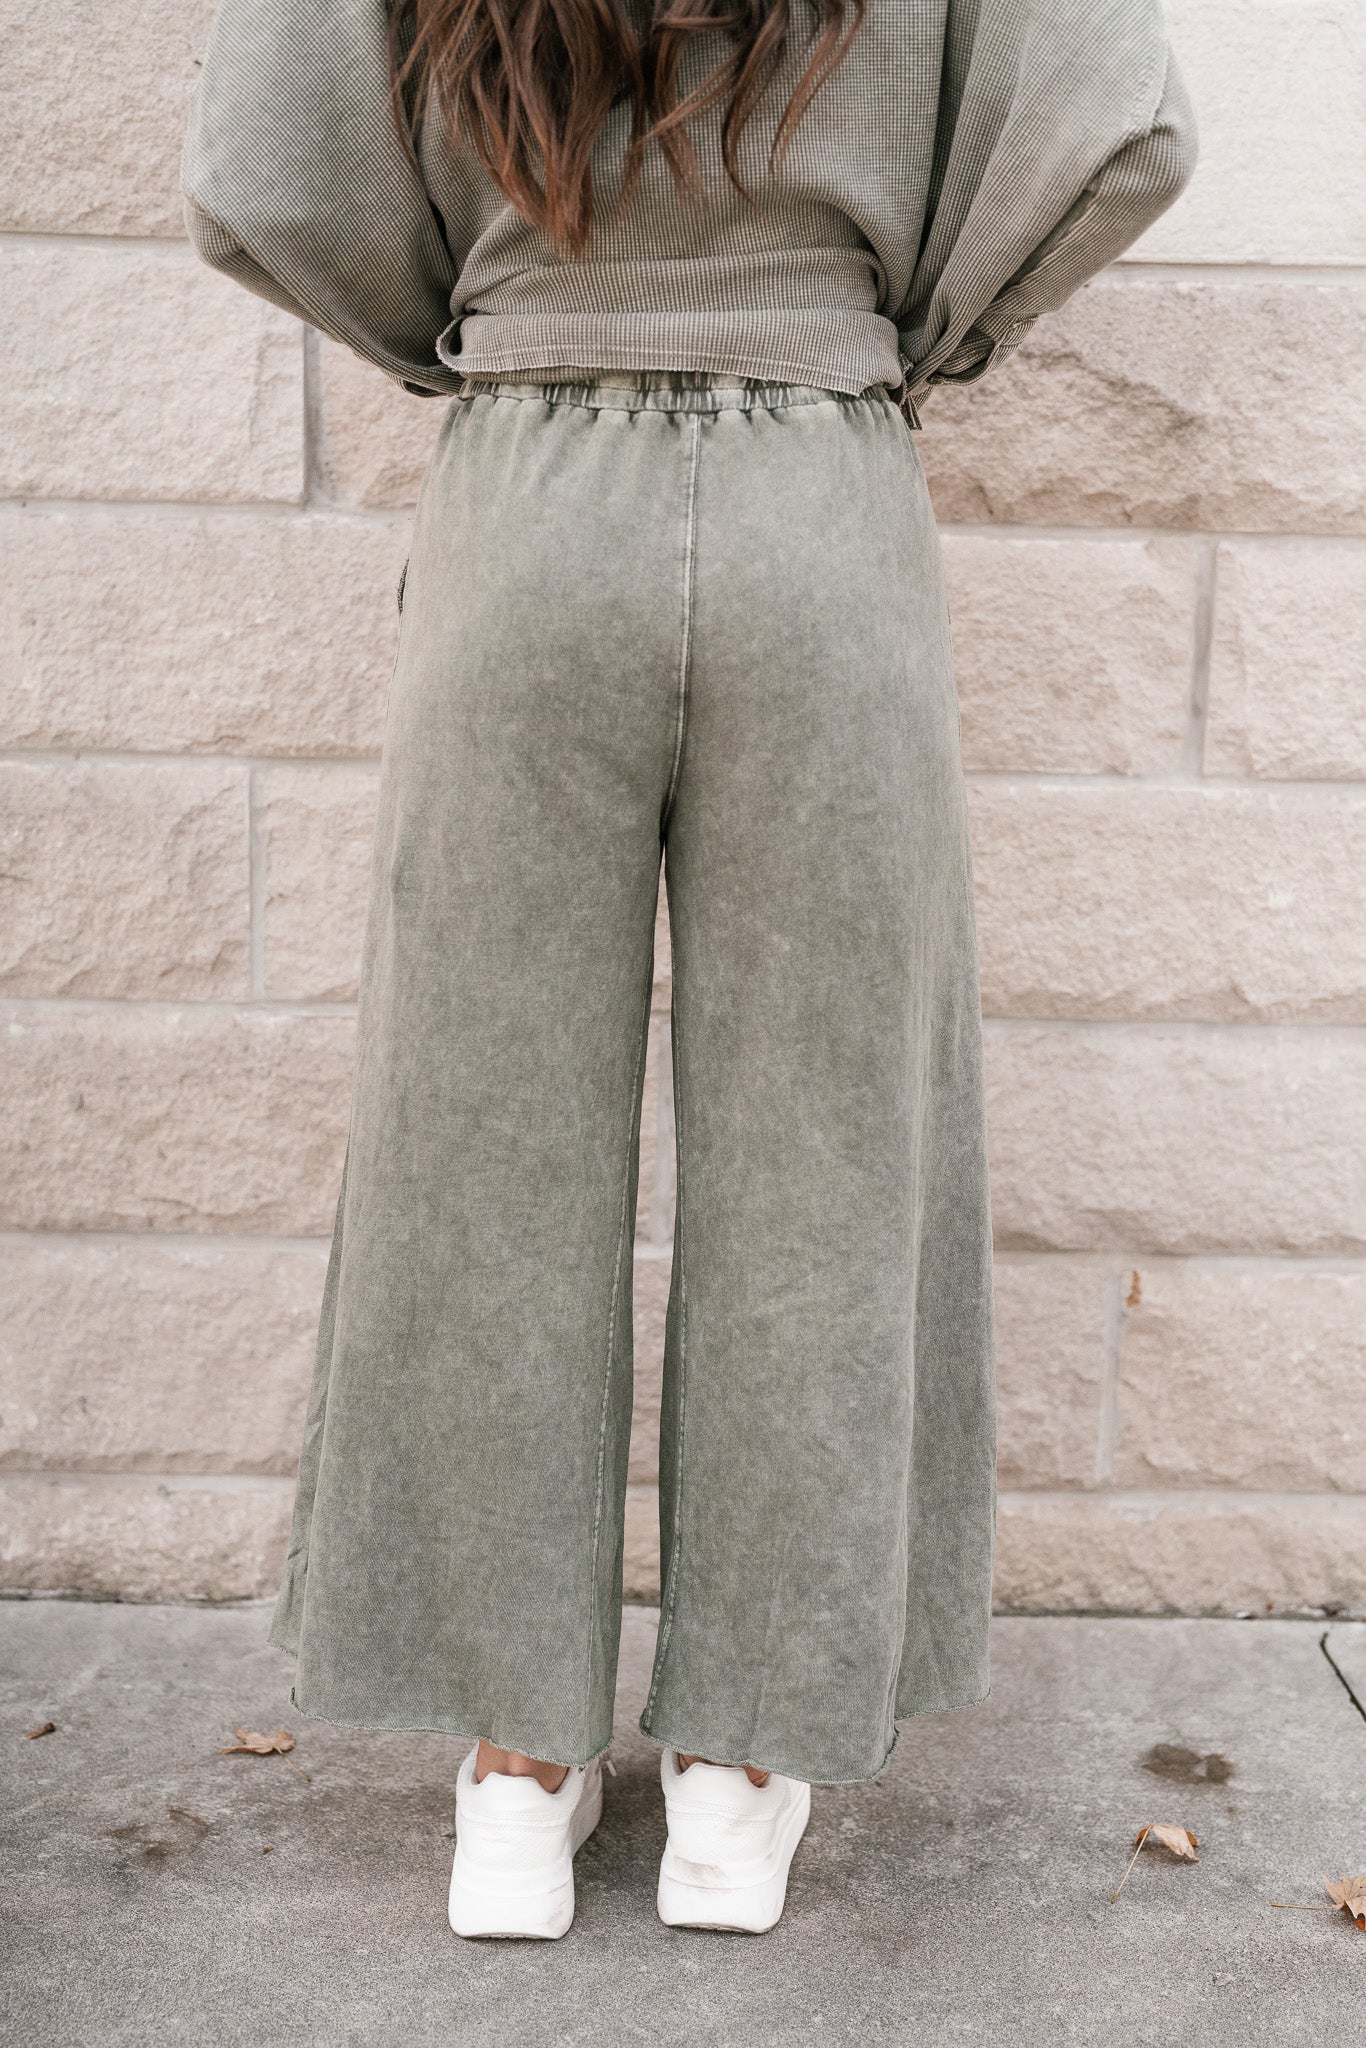 Can't Be Matched Mineral Wash Wide Leg Pants - Olive